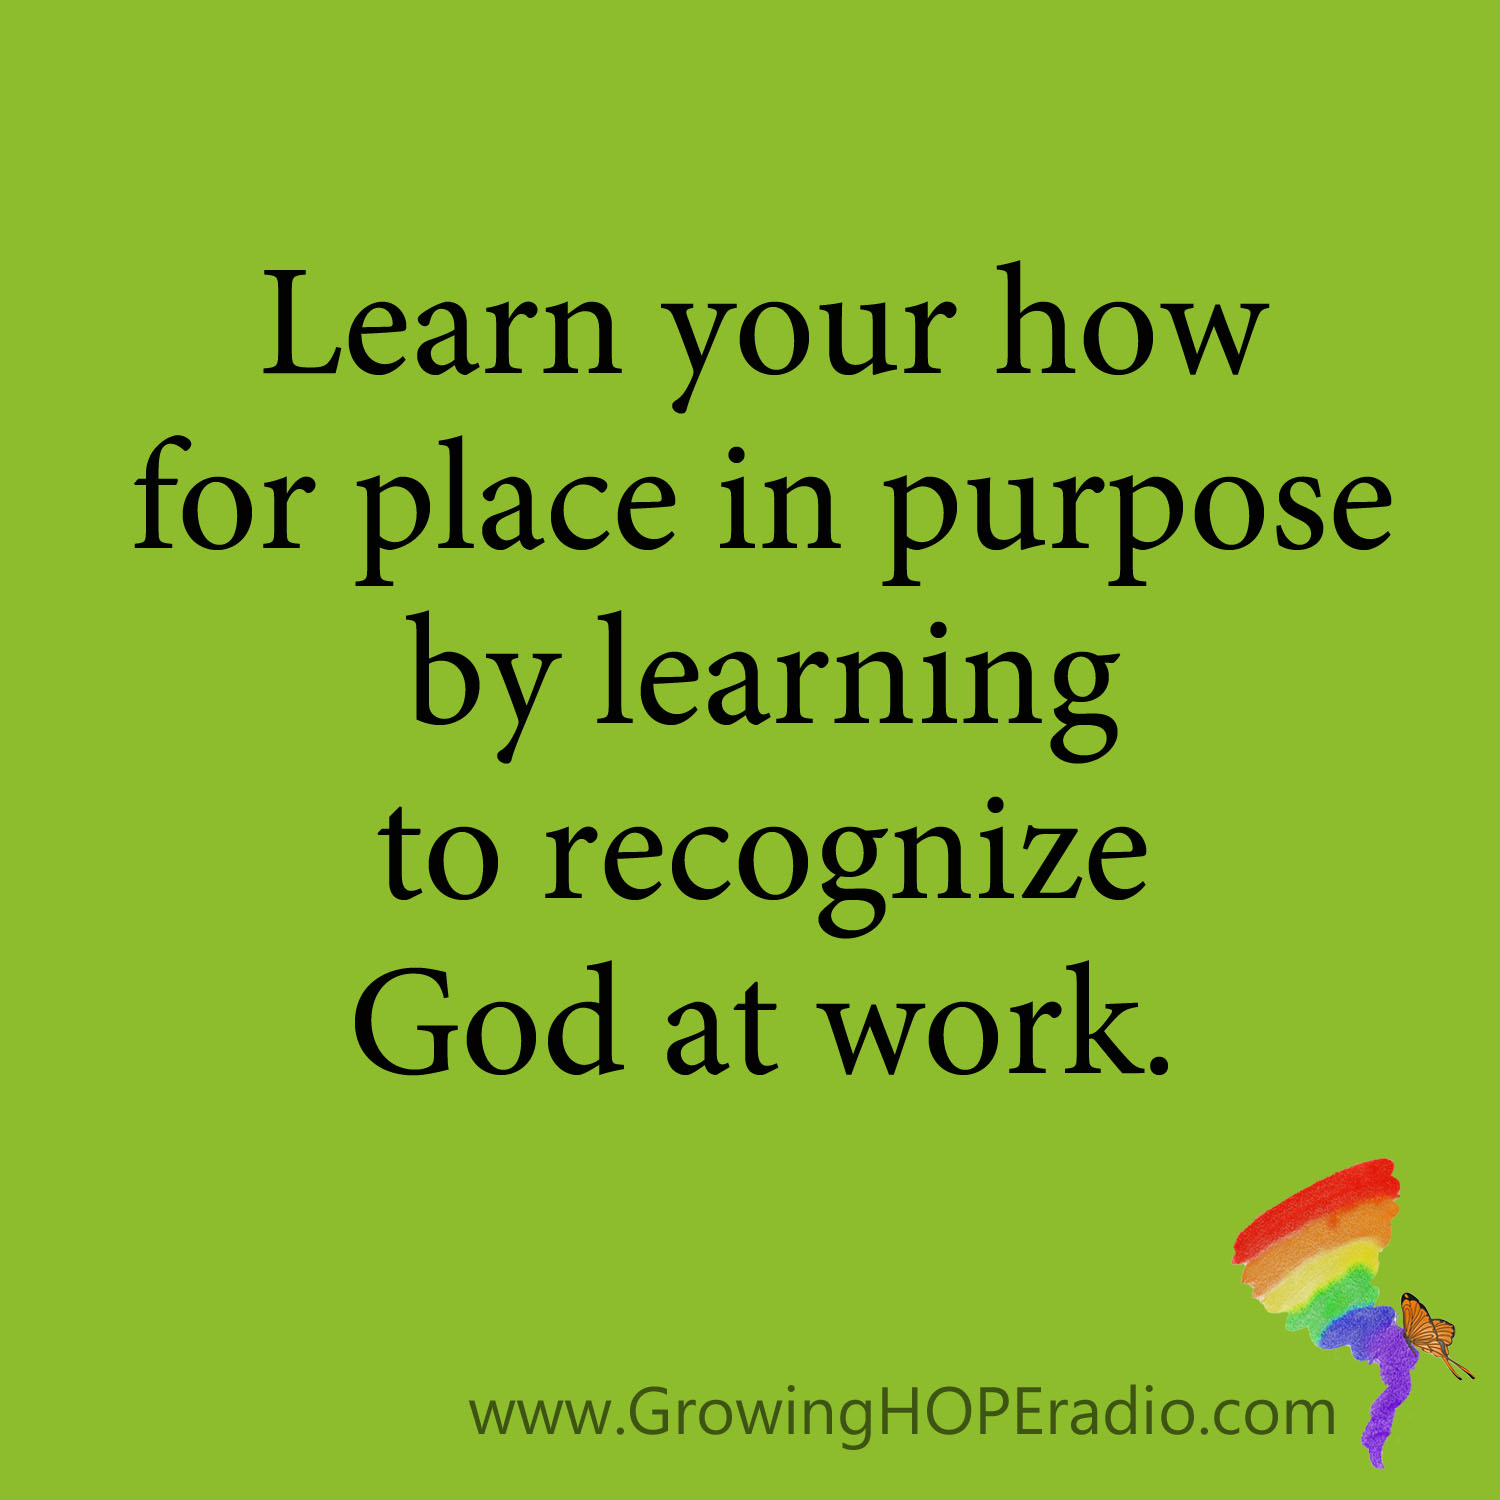 Growing HOPE Daily - quote recognize God at work